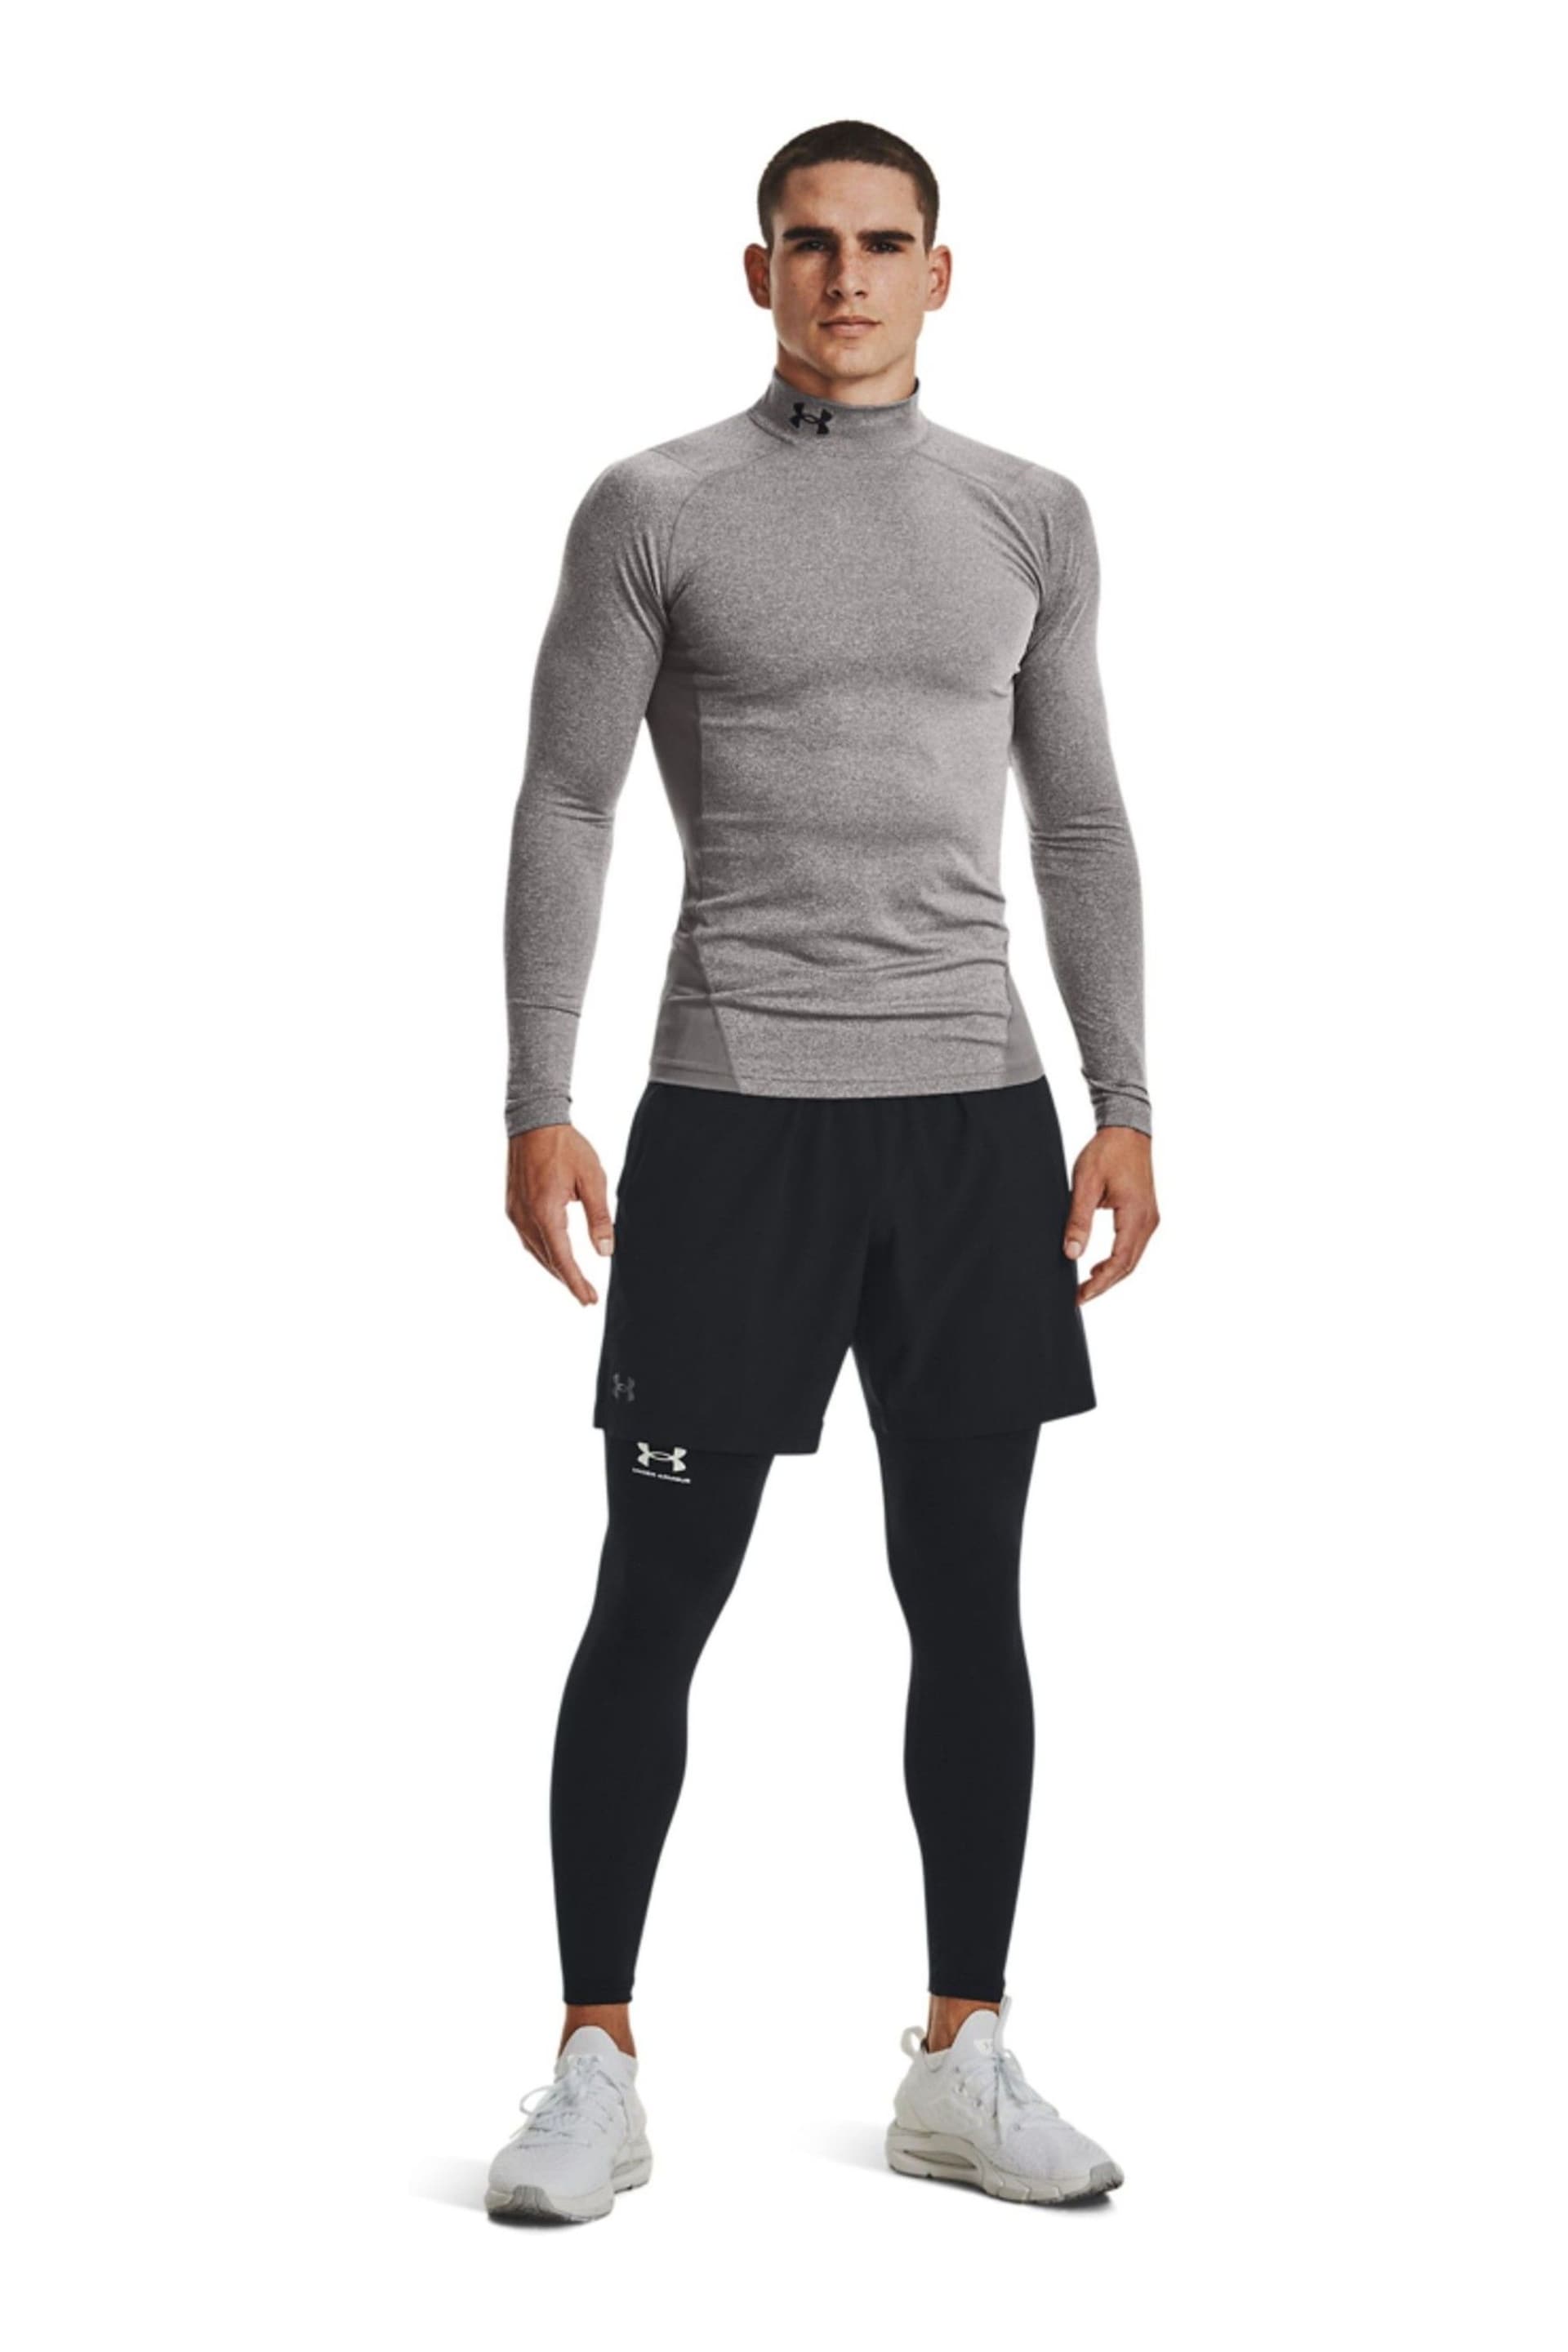 Under Armour Charcoal Grey Under Armour Charcoal Grey Coldgear Mock Neck Base Layer - Image 3 of 6